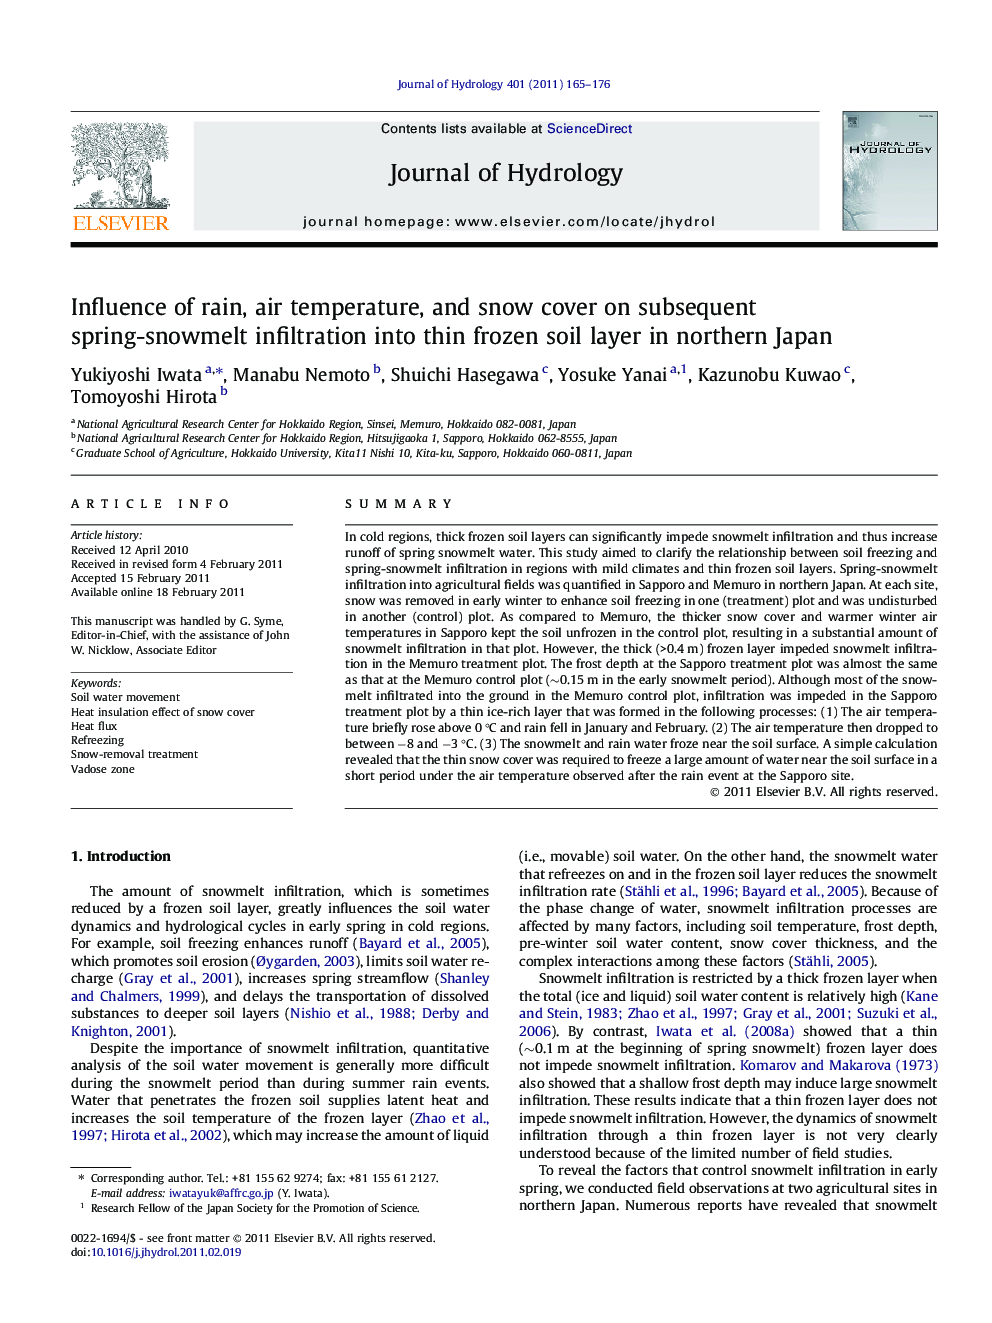 Influence of rain, air temperature, and snow cover on subsequent spring-snowmelt infiltration into thin frozen soil layer in northern Japan